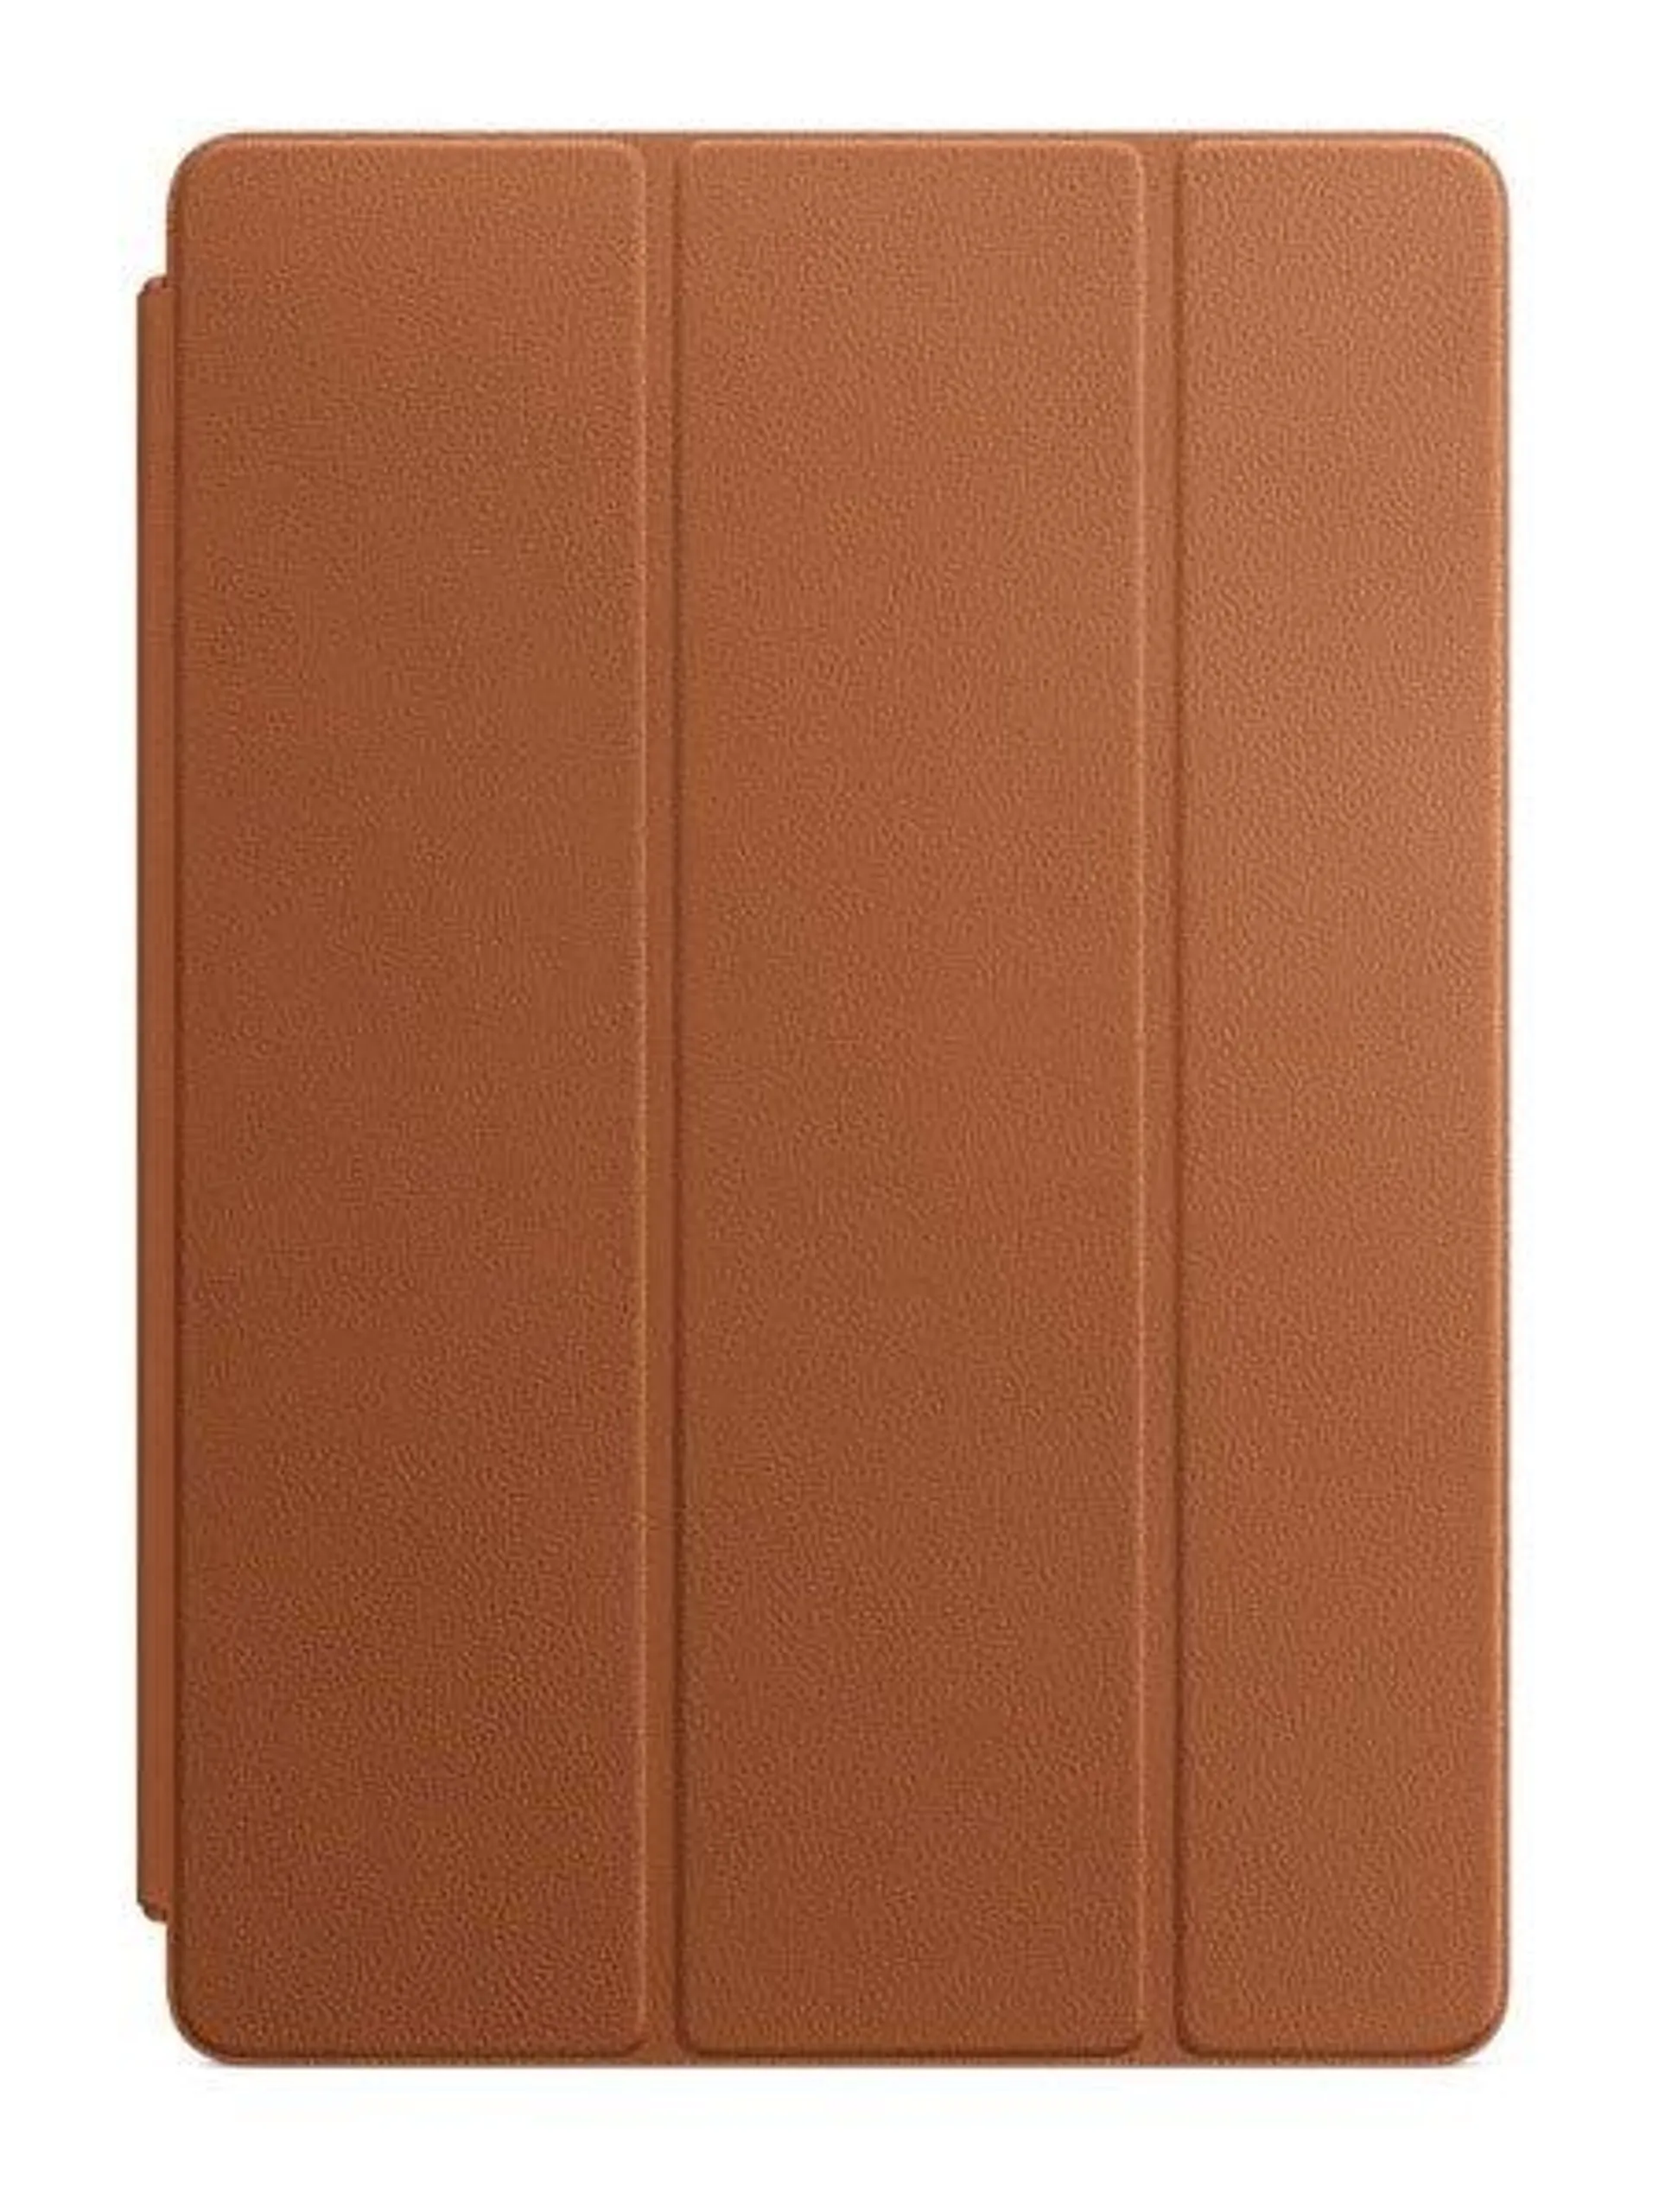 Apple Leather Smart Cover FOR iPad PRO Bagages